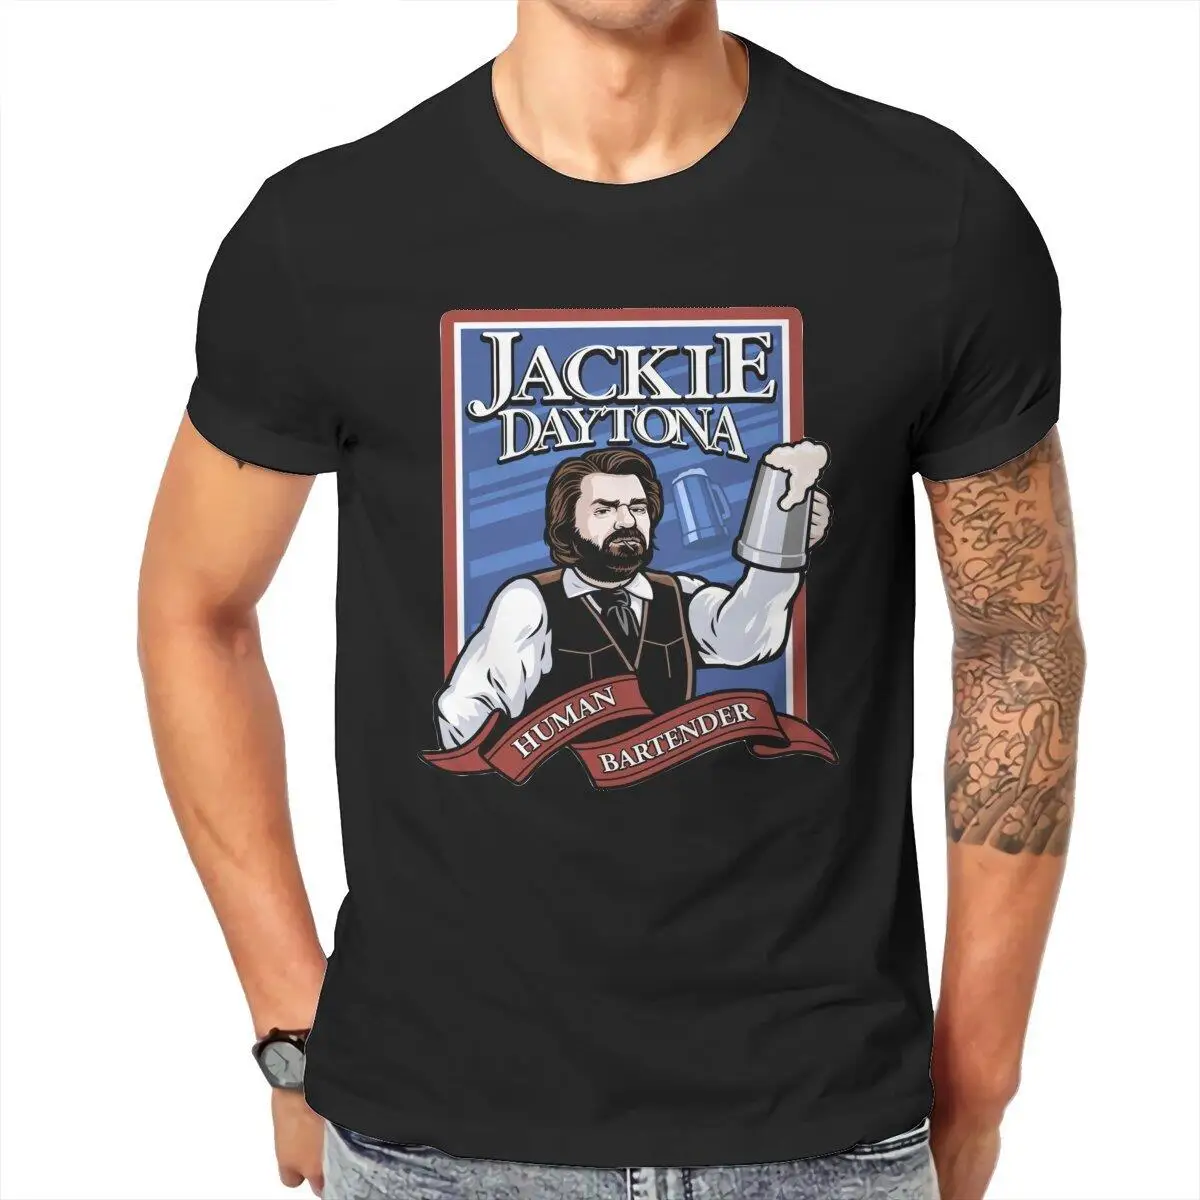 Jackie Daytona Bartender  T Shirts Men Cotton Leisure T-Shirt What We Do in the Shadows Tees Short Sleeve Clothing Summer